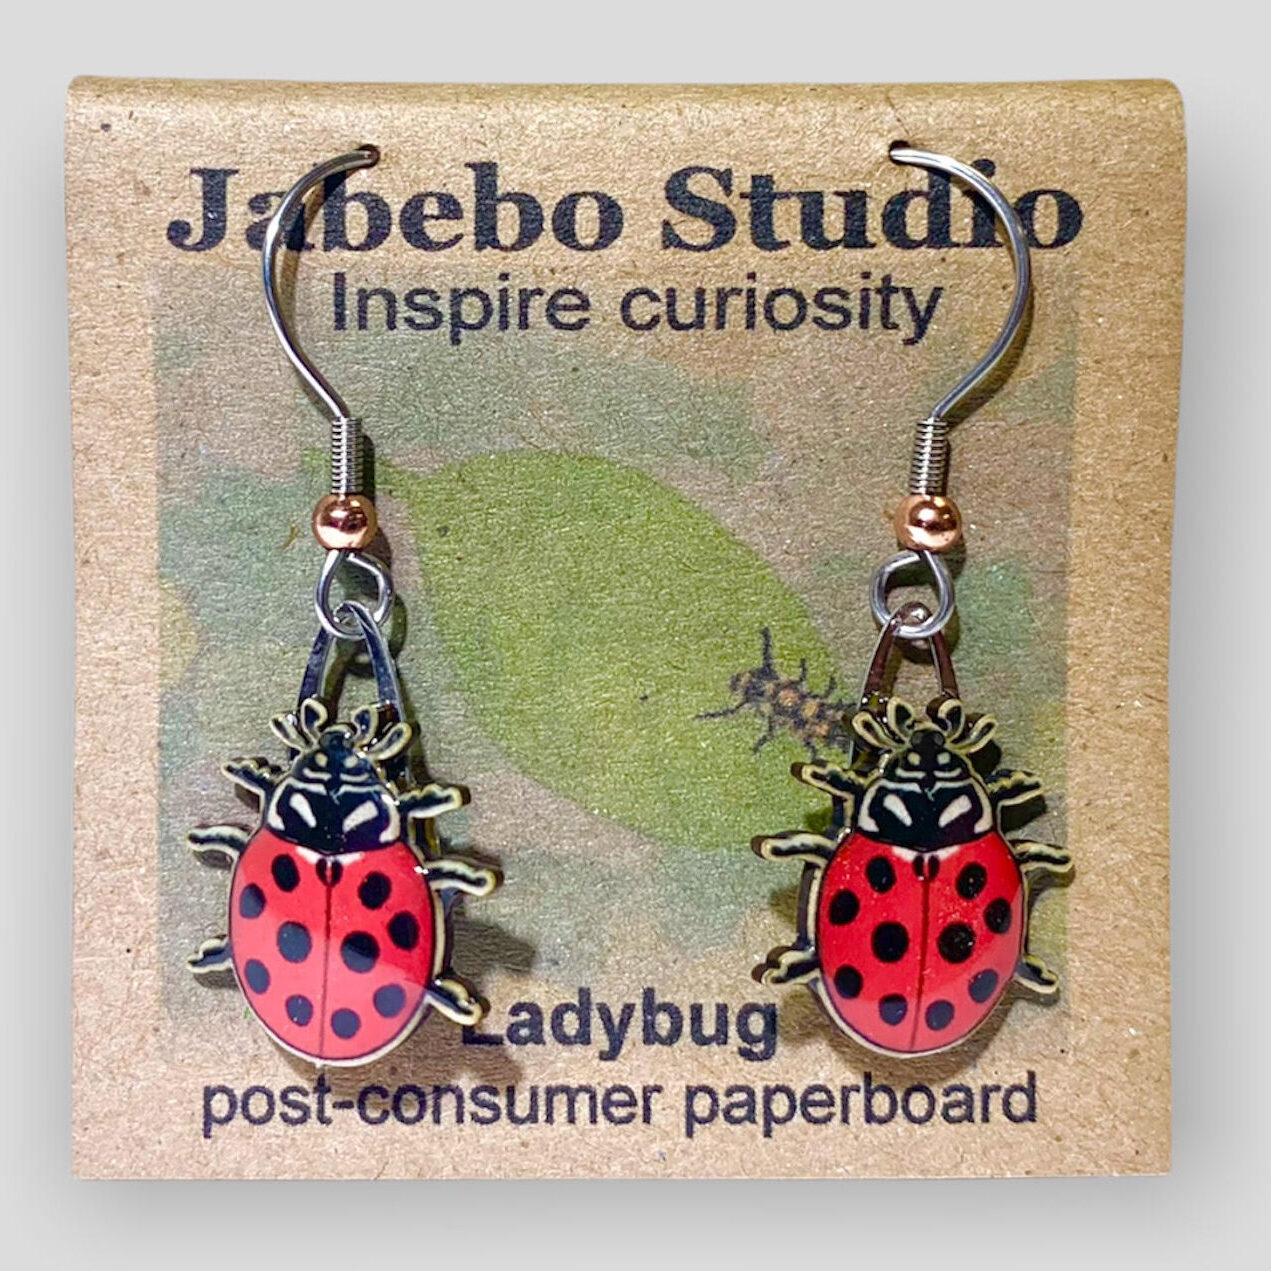 Picture shown is of 1 inch tall pair of earrings of the bug the Ladybug.